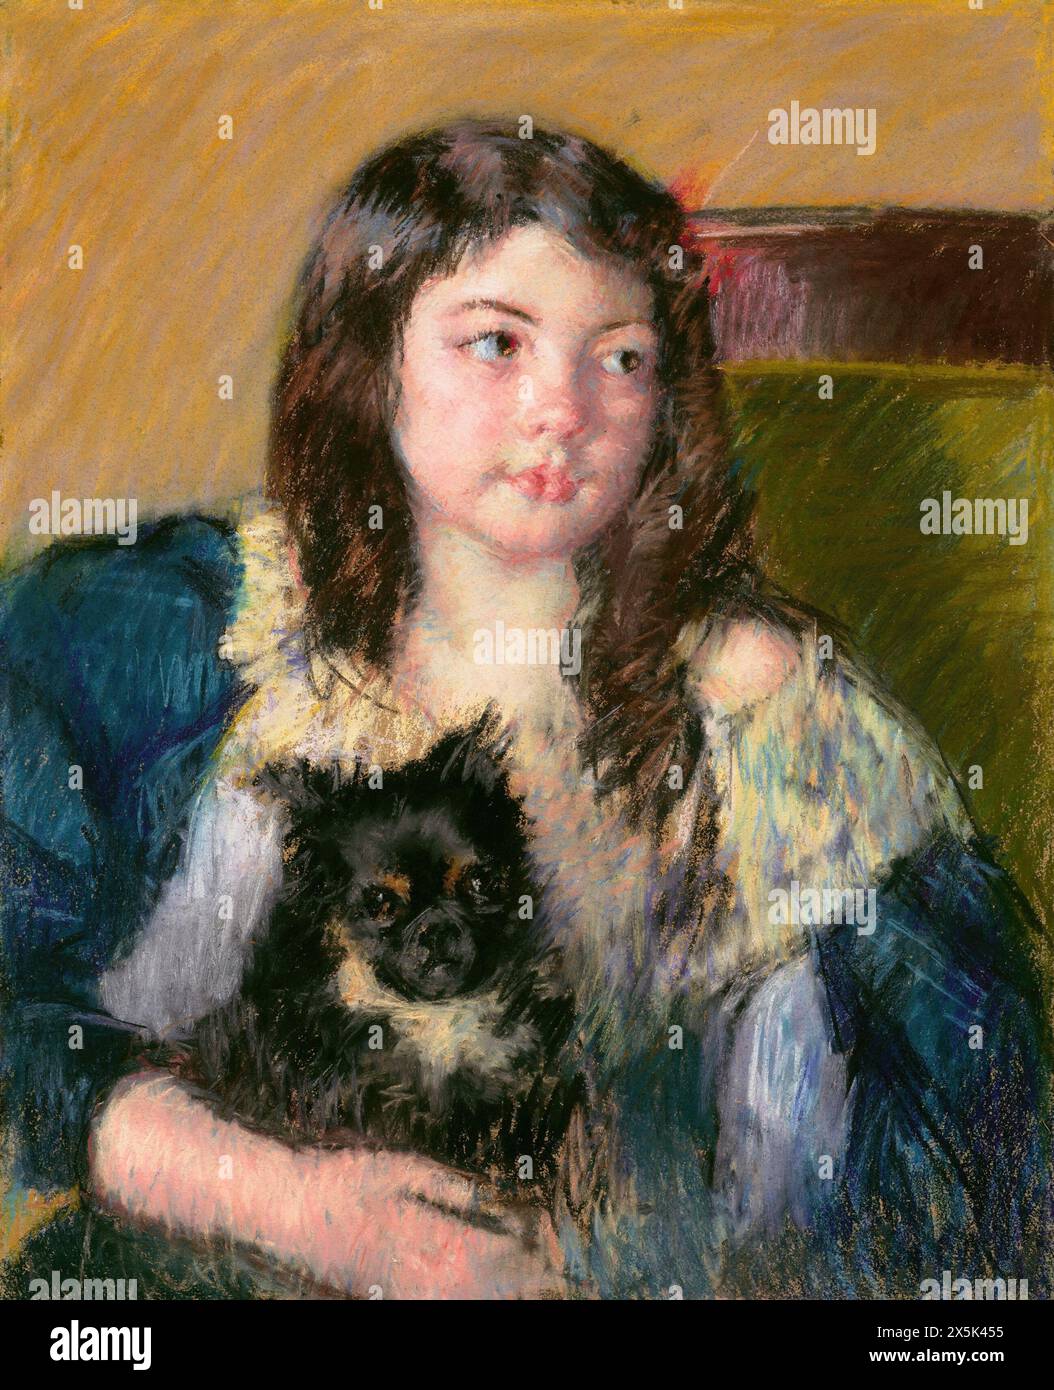 Painting by american artist Mary Cassatt (1844-1926) Françoise, Holding a Little Dog, Looking Far to the Right (1909) Stock Photo